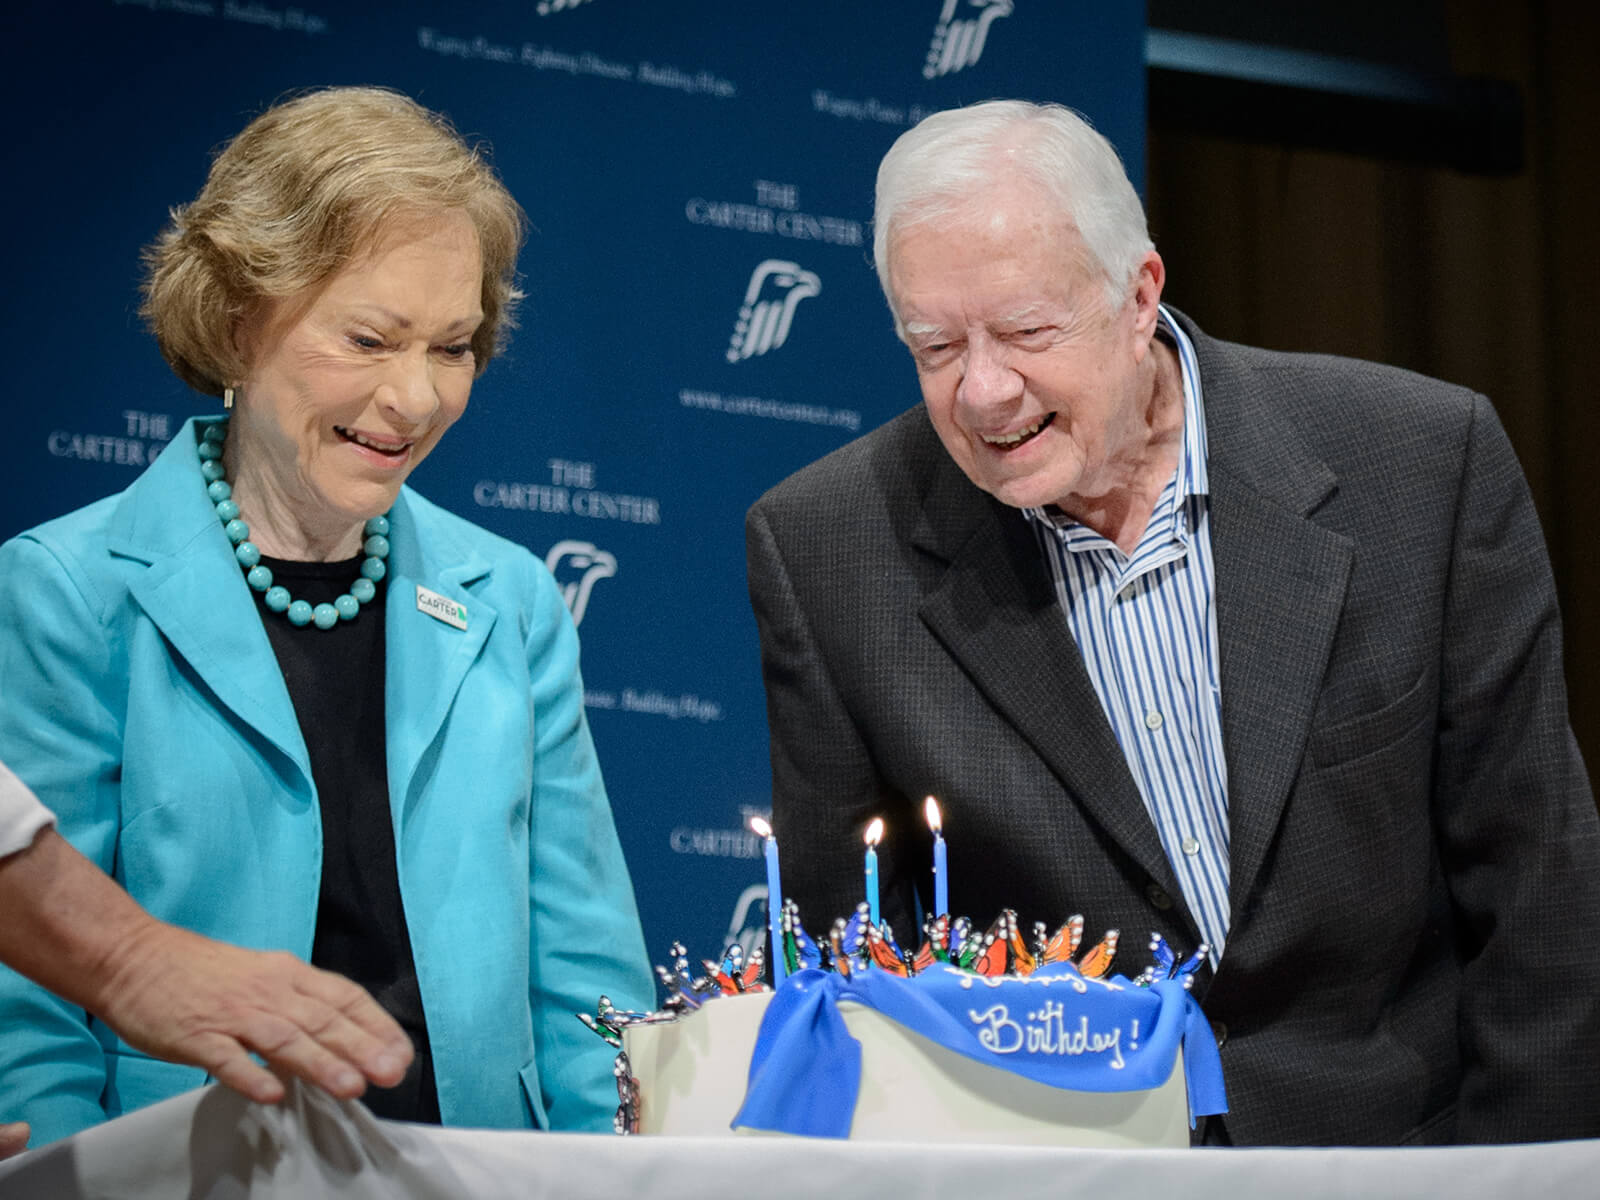 Graphic of President Carter blowing out candles on his 90th birthday.